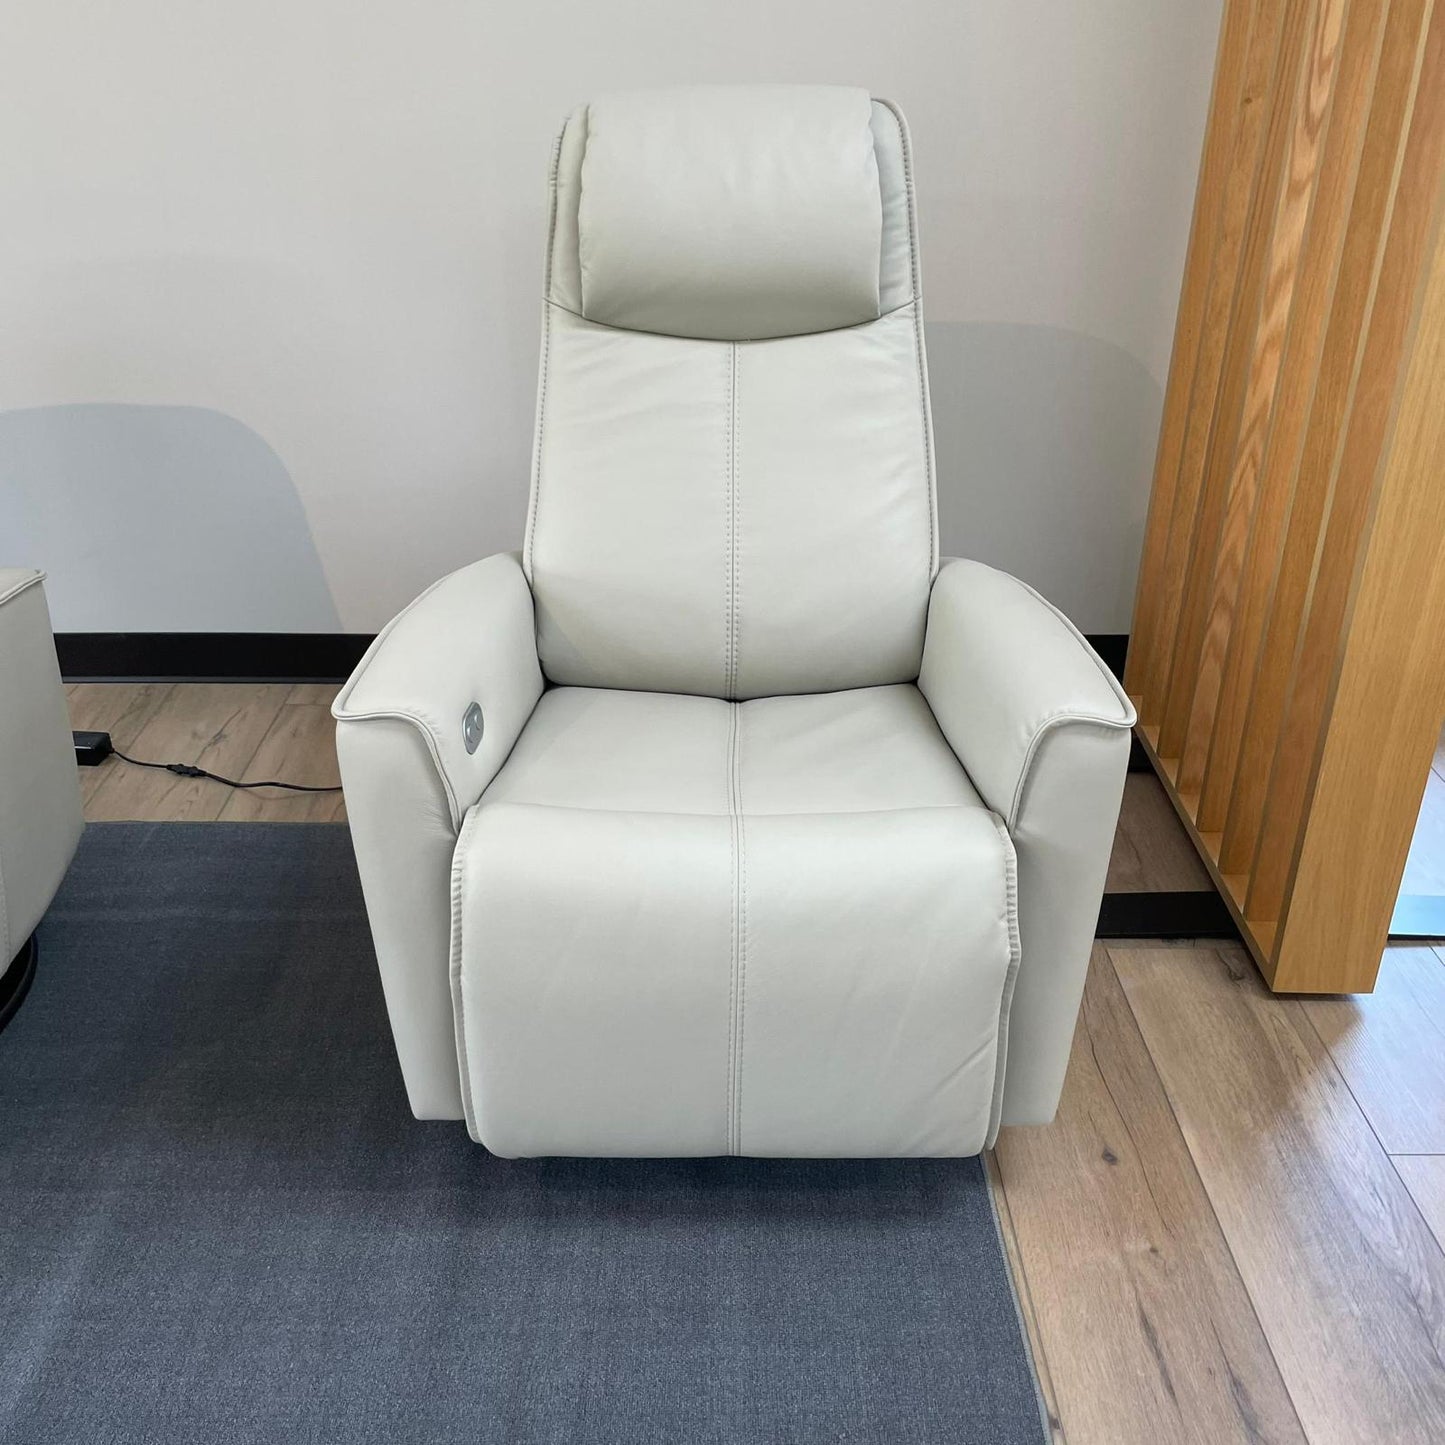 Fjords Urban - Small Size - (Power Recliner)